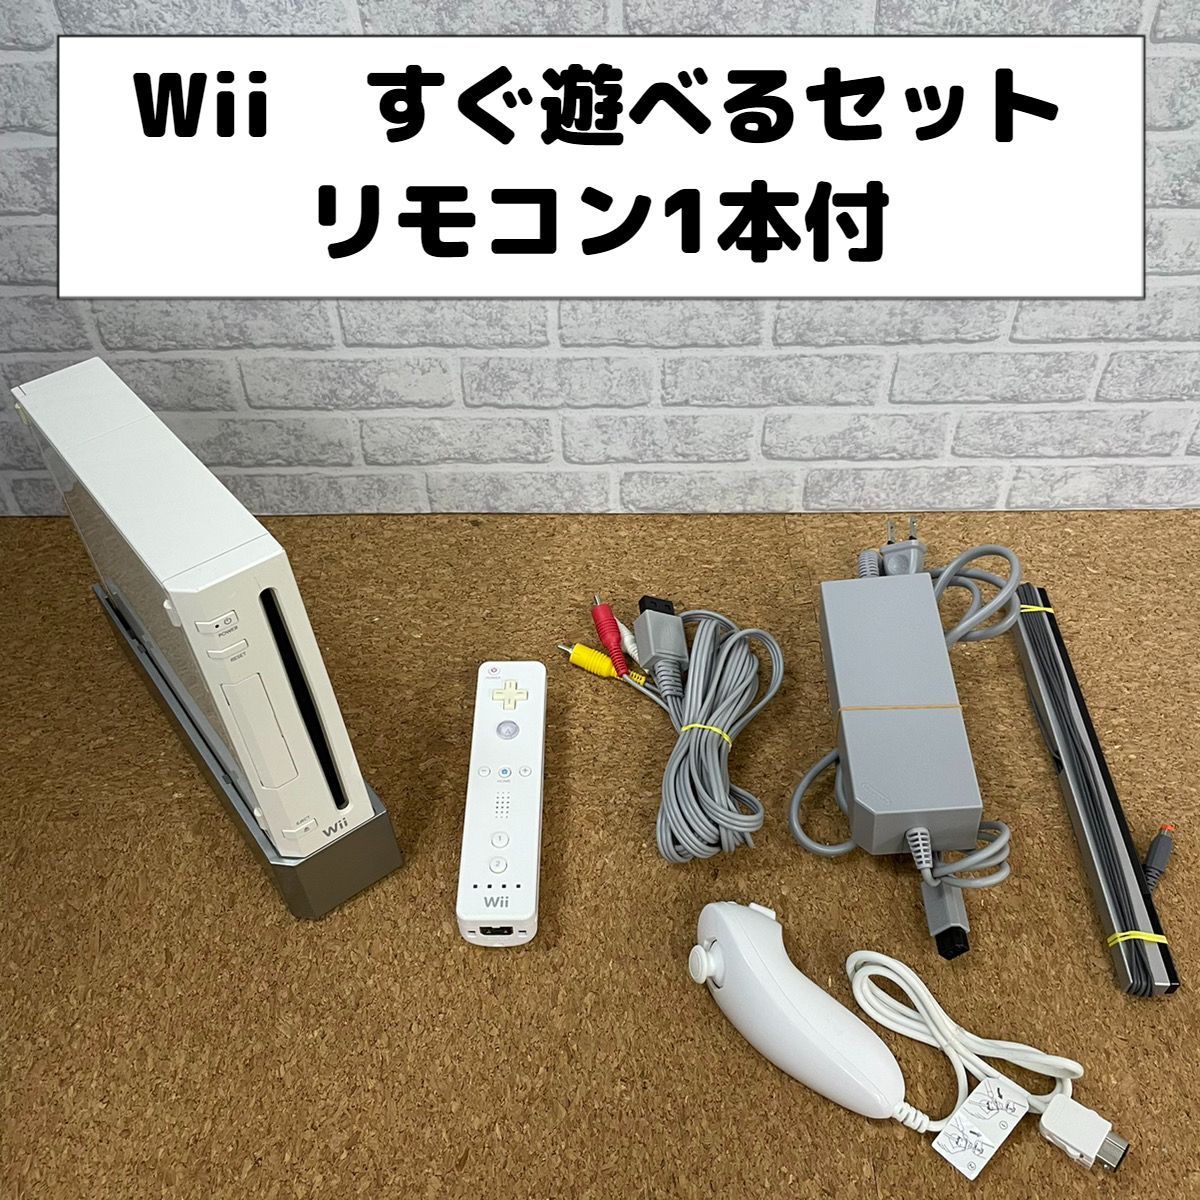 Wii色々セット❤︎すぐに遊べます❤︎ - Wii